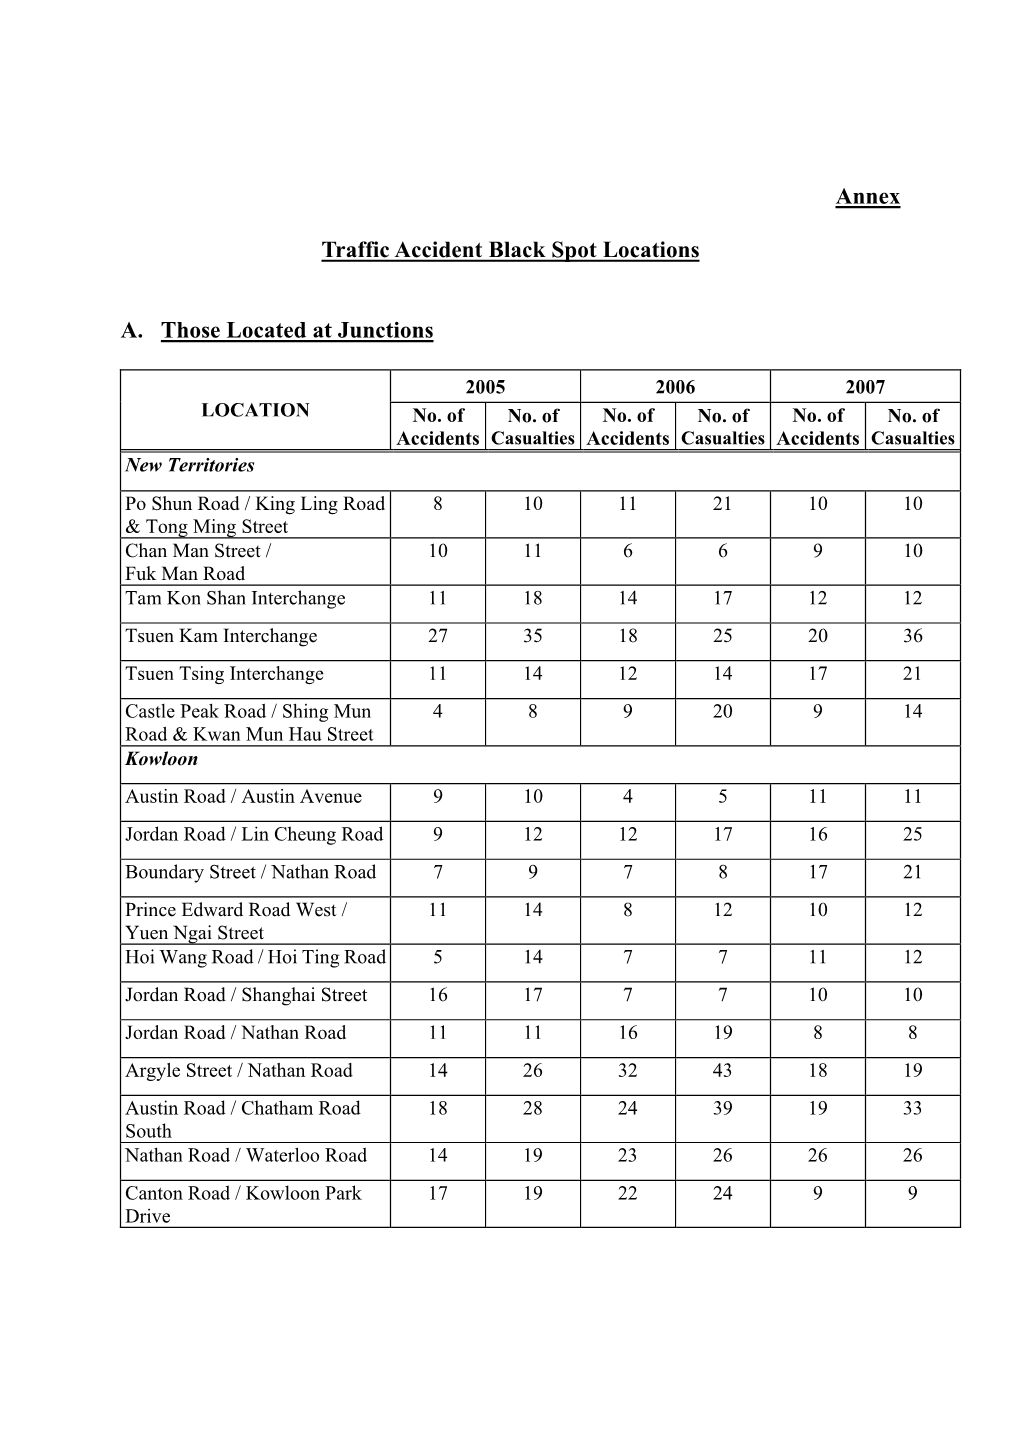 Annex Traffic Accident Black Spot Locations A. Those Located At